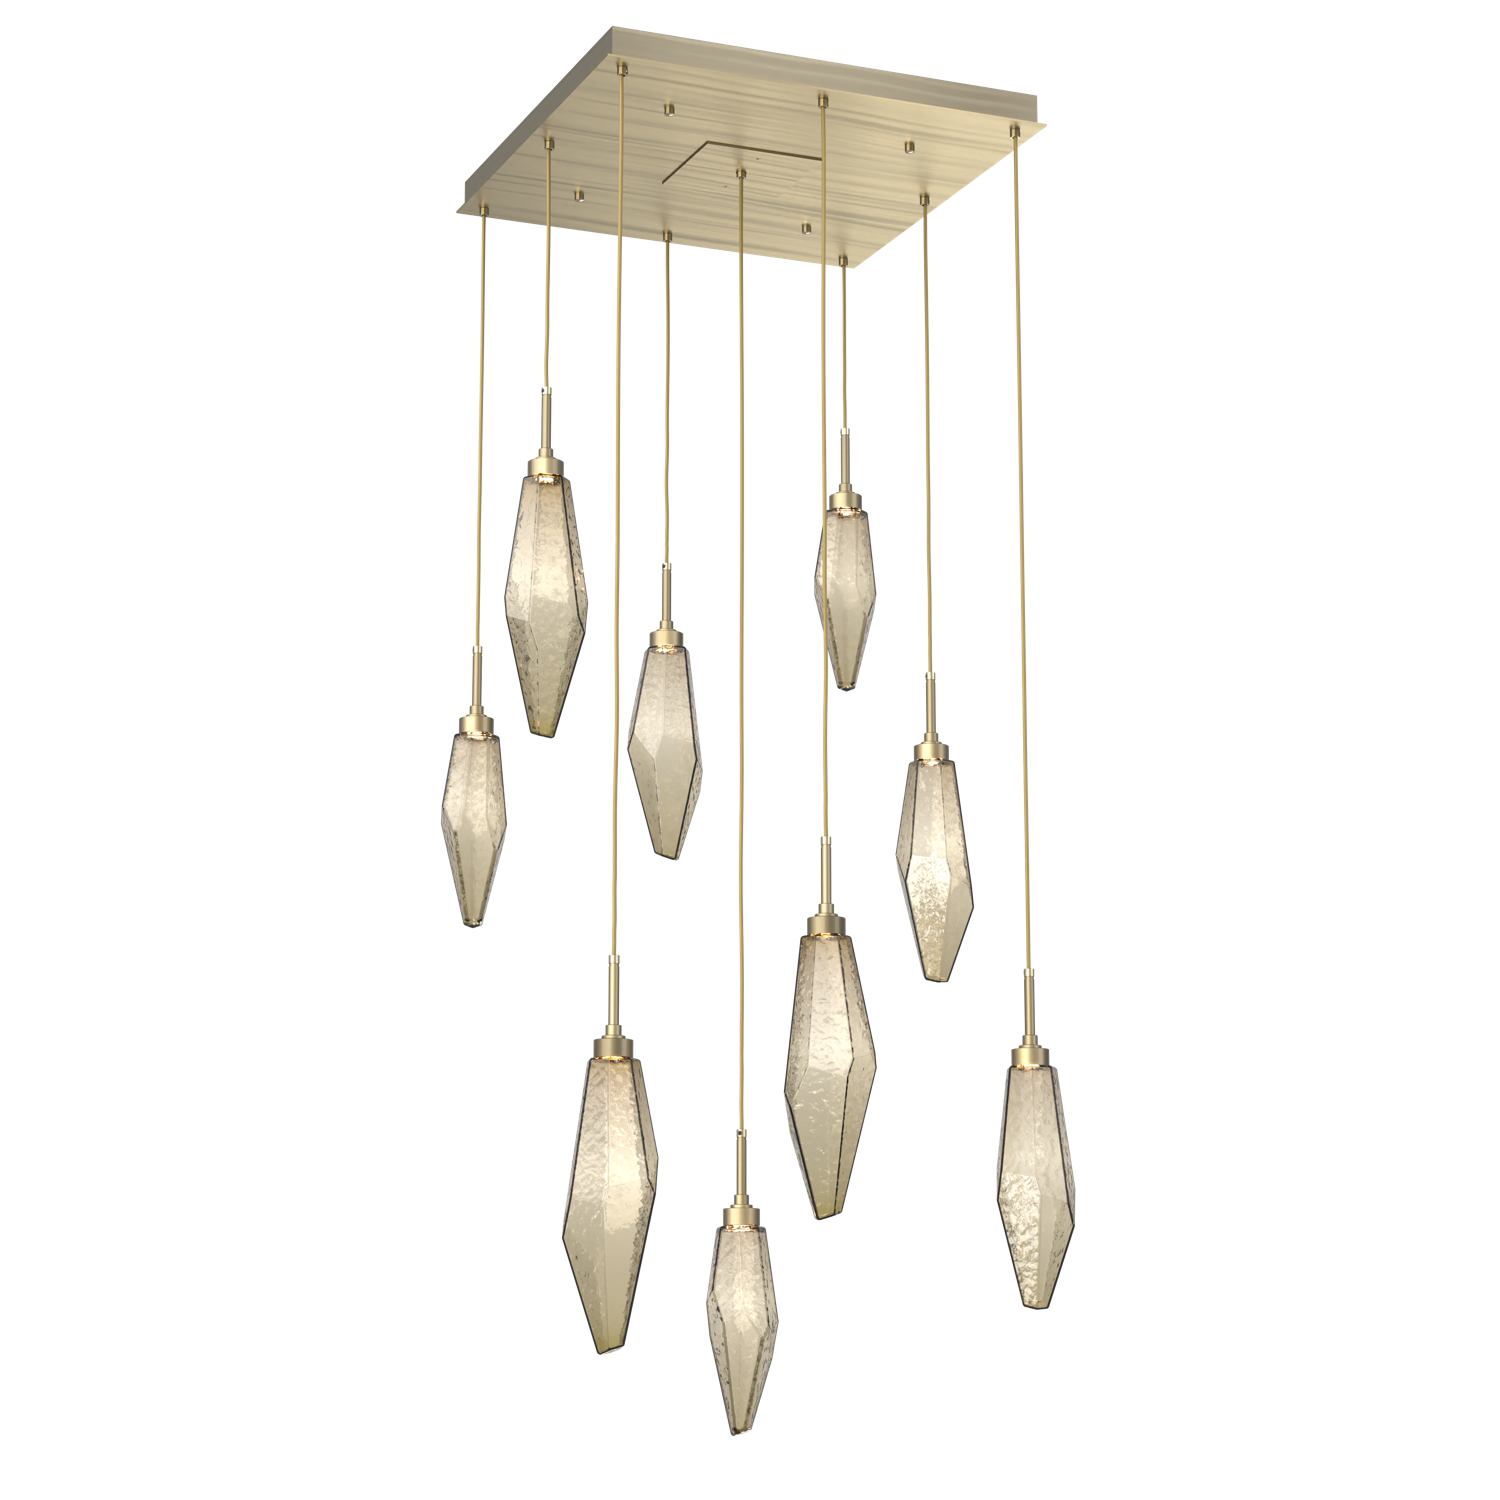 CHB0050-09-HB-CB-Hammerton-Studio-Rock-Crystal-9-light-square-pendant-chandelier-with-heritage-brass-finish-and-chilled-bronze-blown-glass-shades-and-LED-lamping